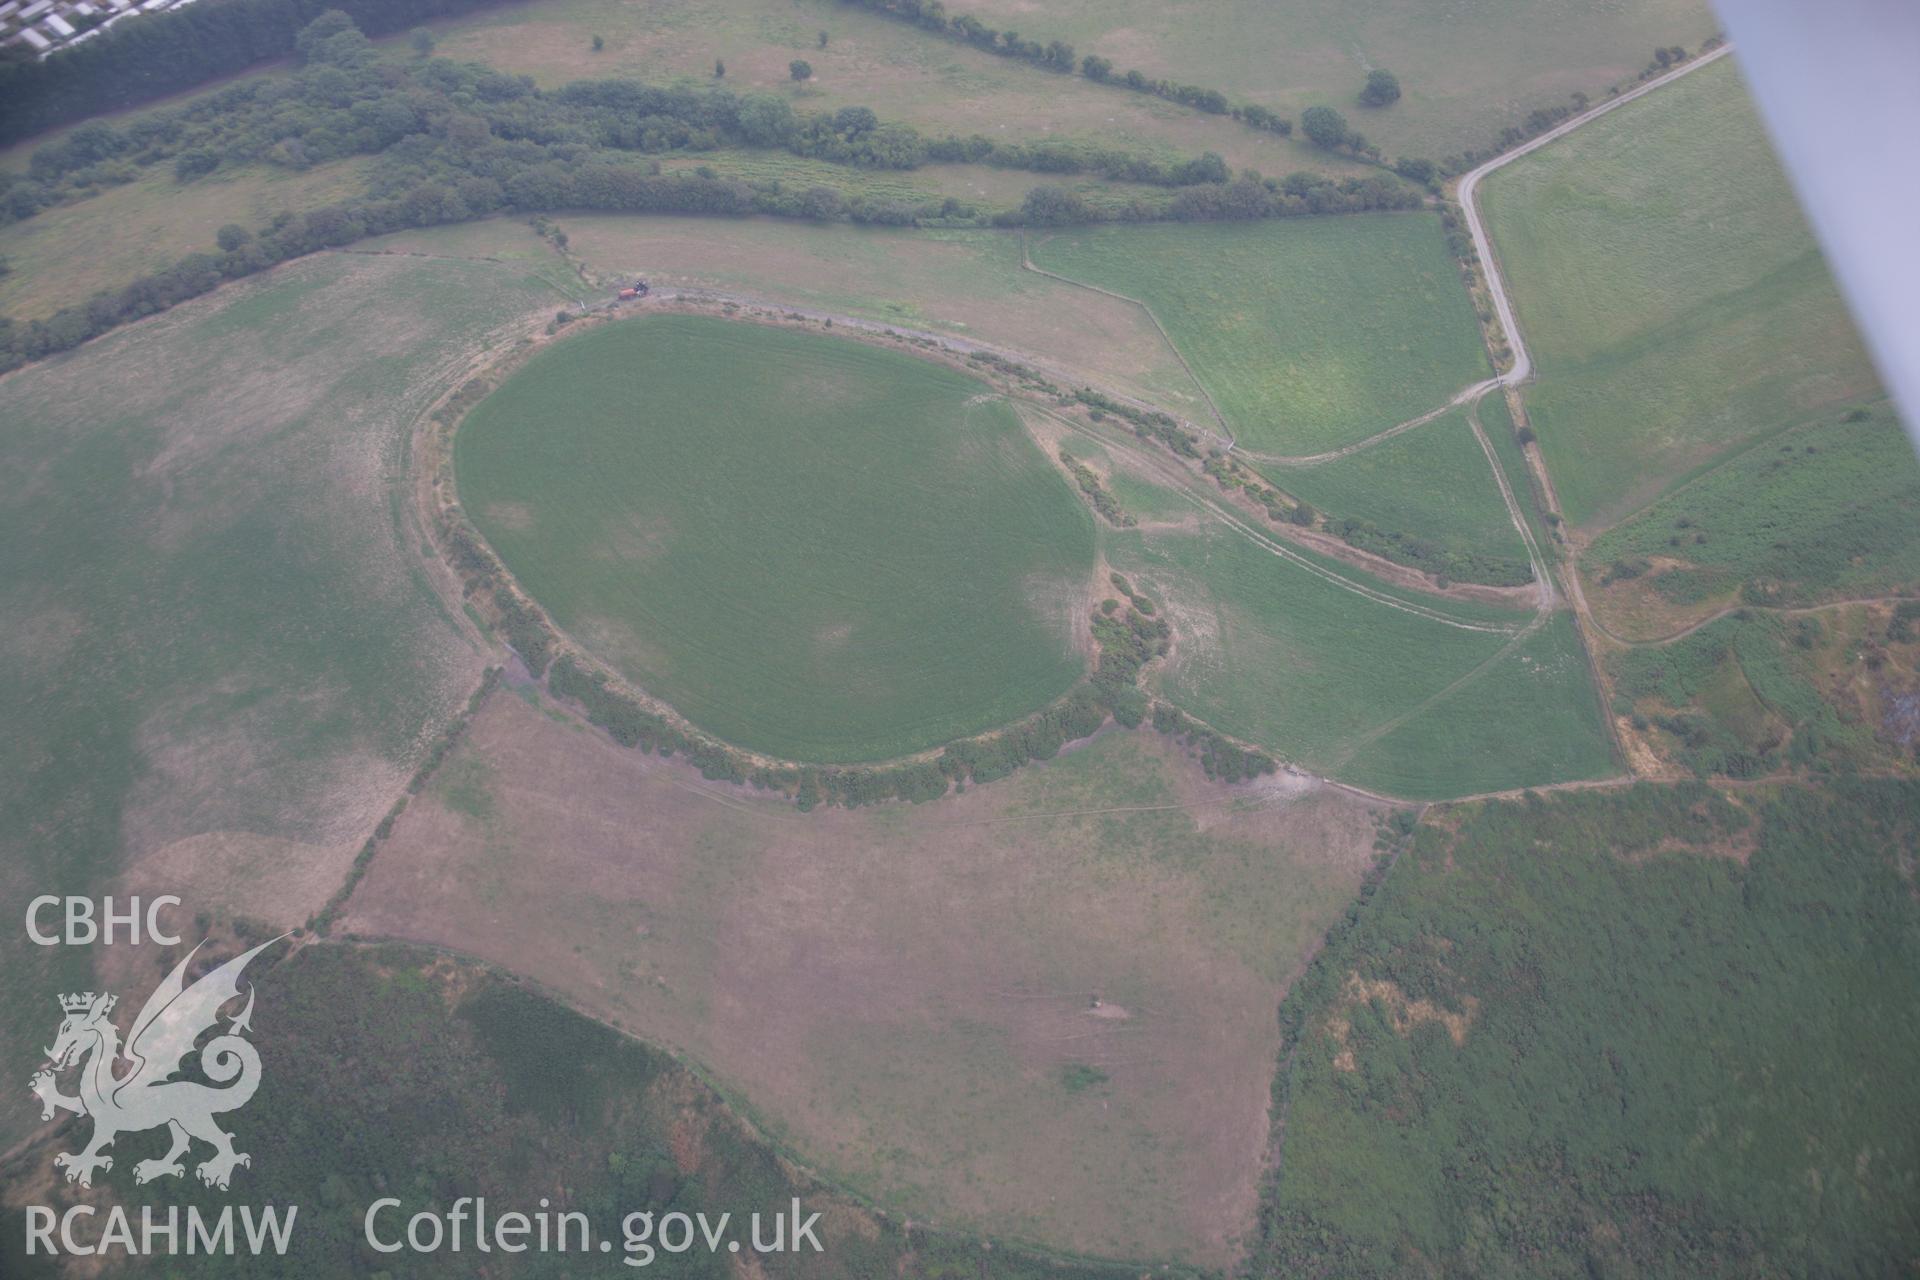 RCAHMW colour oblique aerial photograph of Pen Dinas Hillfort, Aberystwyth. Taken on 21 July 2006 by Toby Driver.